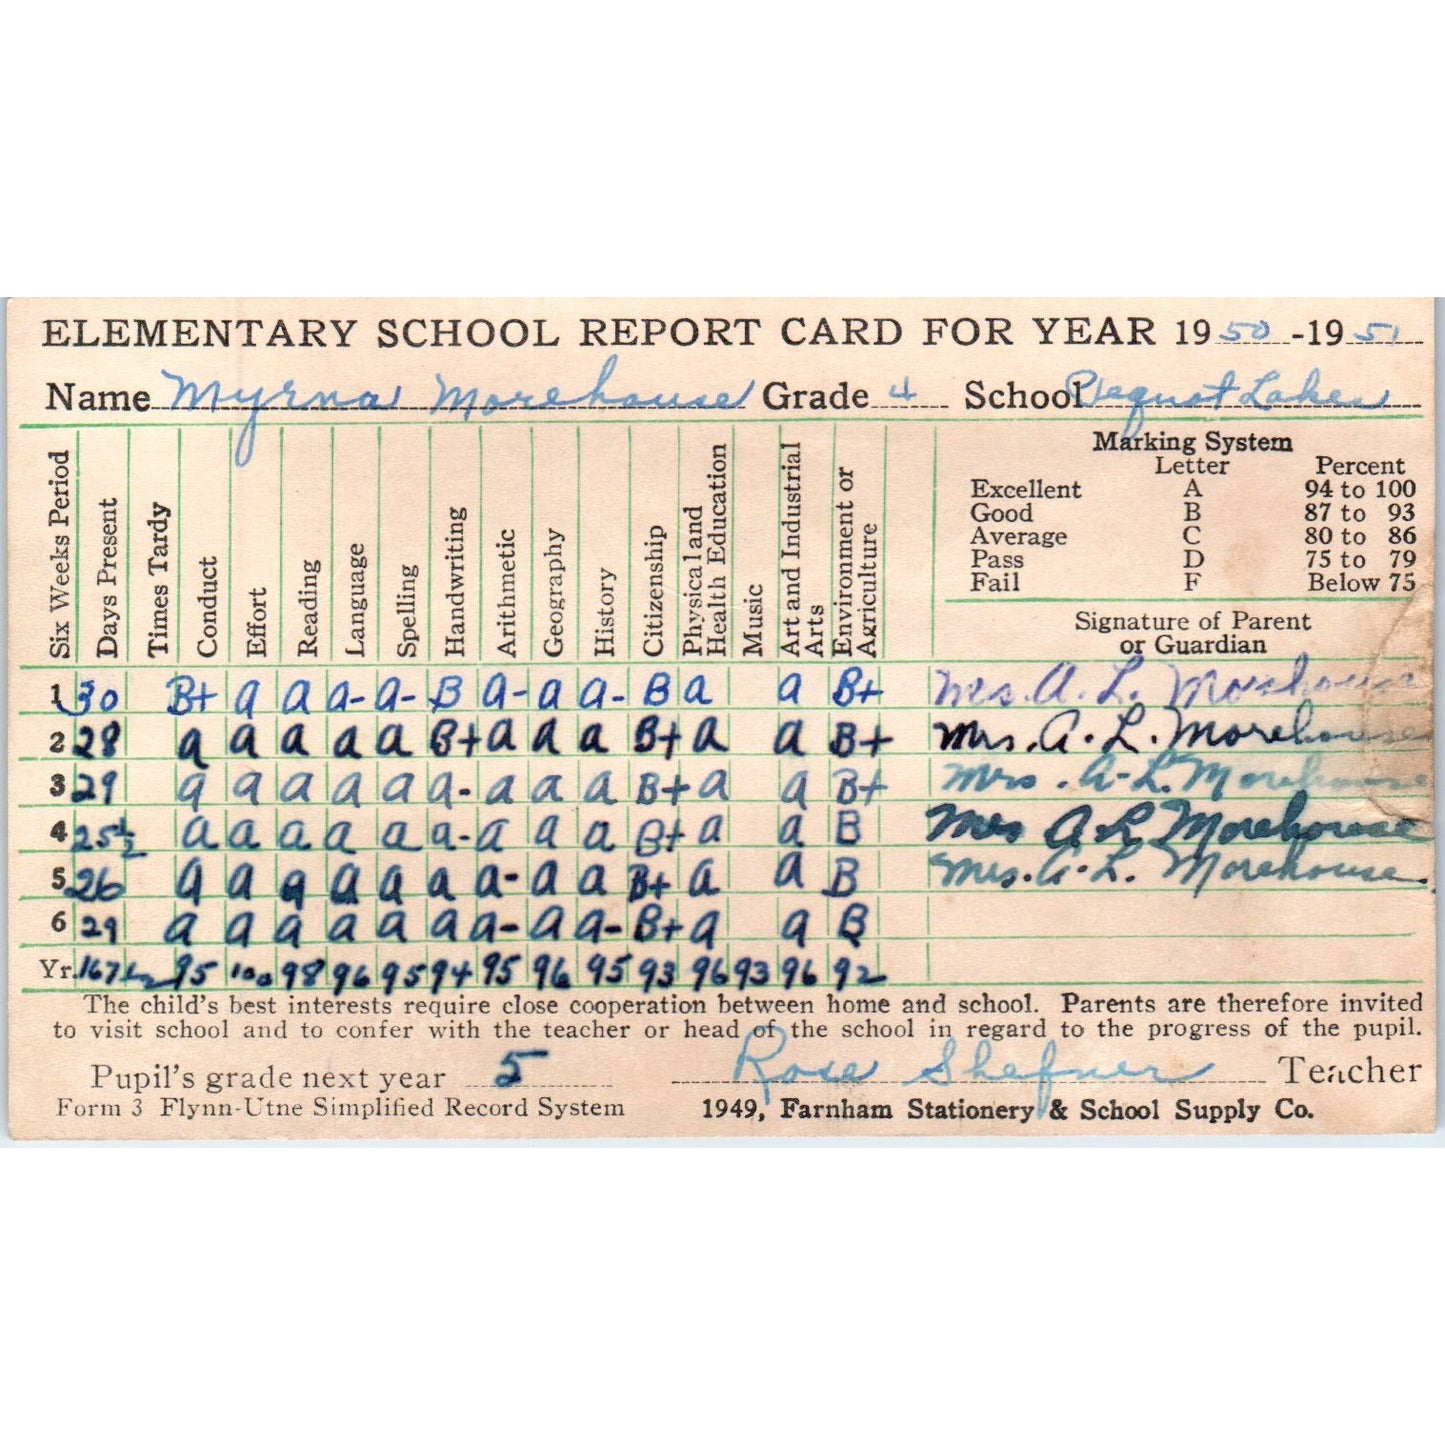 1951-52 Pequot Lakes MN Elementary School Report Card Myrna Morehouse TH9-SX1